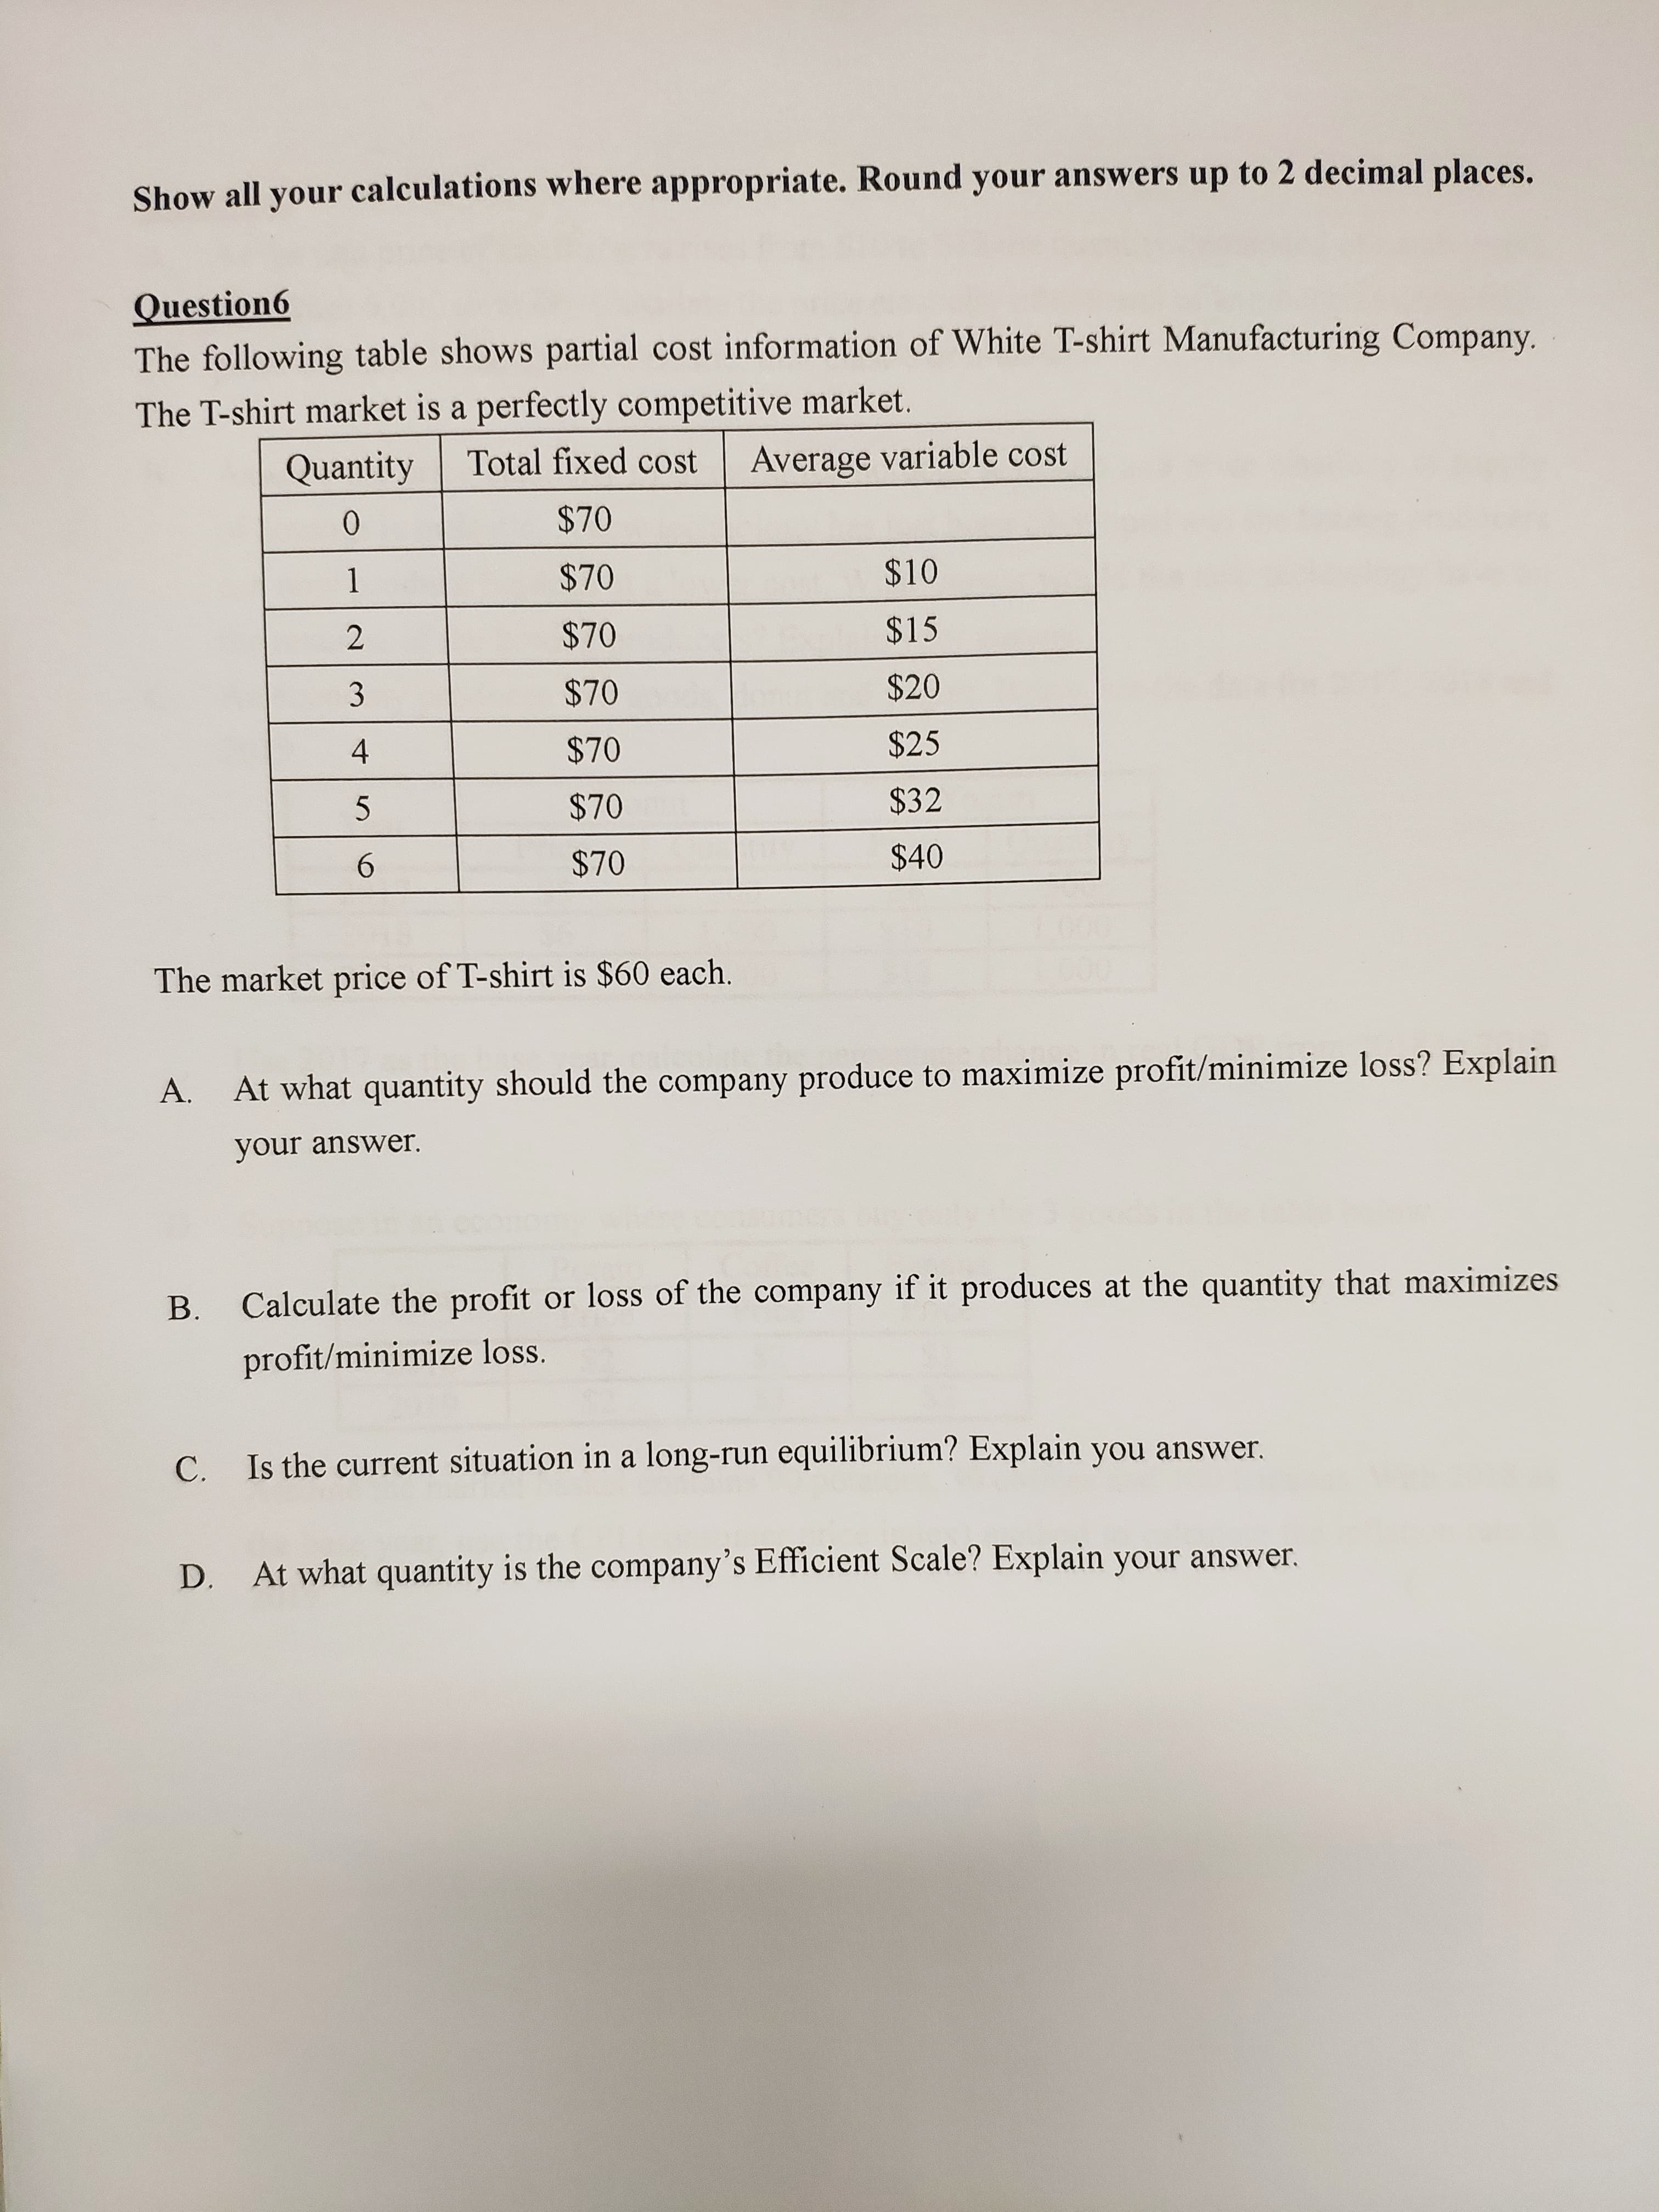 Show all your calculations where appropriate. Round your answers up to 2 decimal places.
Question6
The following table shows partial cost information of White T-shirt Manufacturing Company.
The T-shirt market is a perfectly competitive market.
Average variable cost
Total fixed cost
Quantity
$70
$10
$70
1
$15
$70
$20
$70
$25
$70
$32
$70
$40
$70
6.
The market price of T-shirt is $60 each.
At what quantity should the company produce to maximize profit/minimize loss? Explain
A.
your answer.
Calculate the profit or loss of the company if it produces at the quantity that maximizes
B.
profit/minimize loss.
C. Is the current situation in a long-run equilibrium? Explain you answer.
At what quantity is the company's Efficient Scale? Explain your answer.
D.
3.
4-
